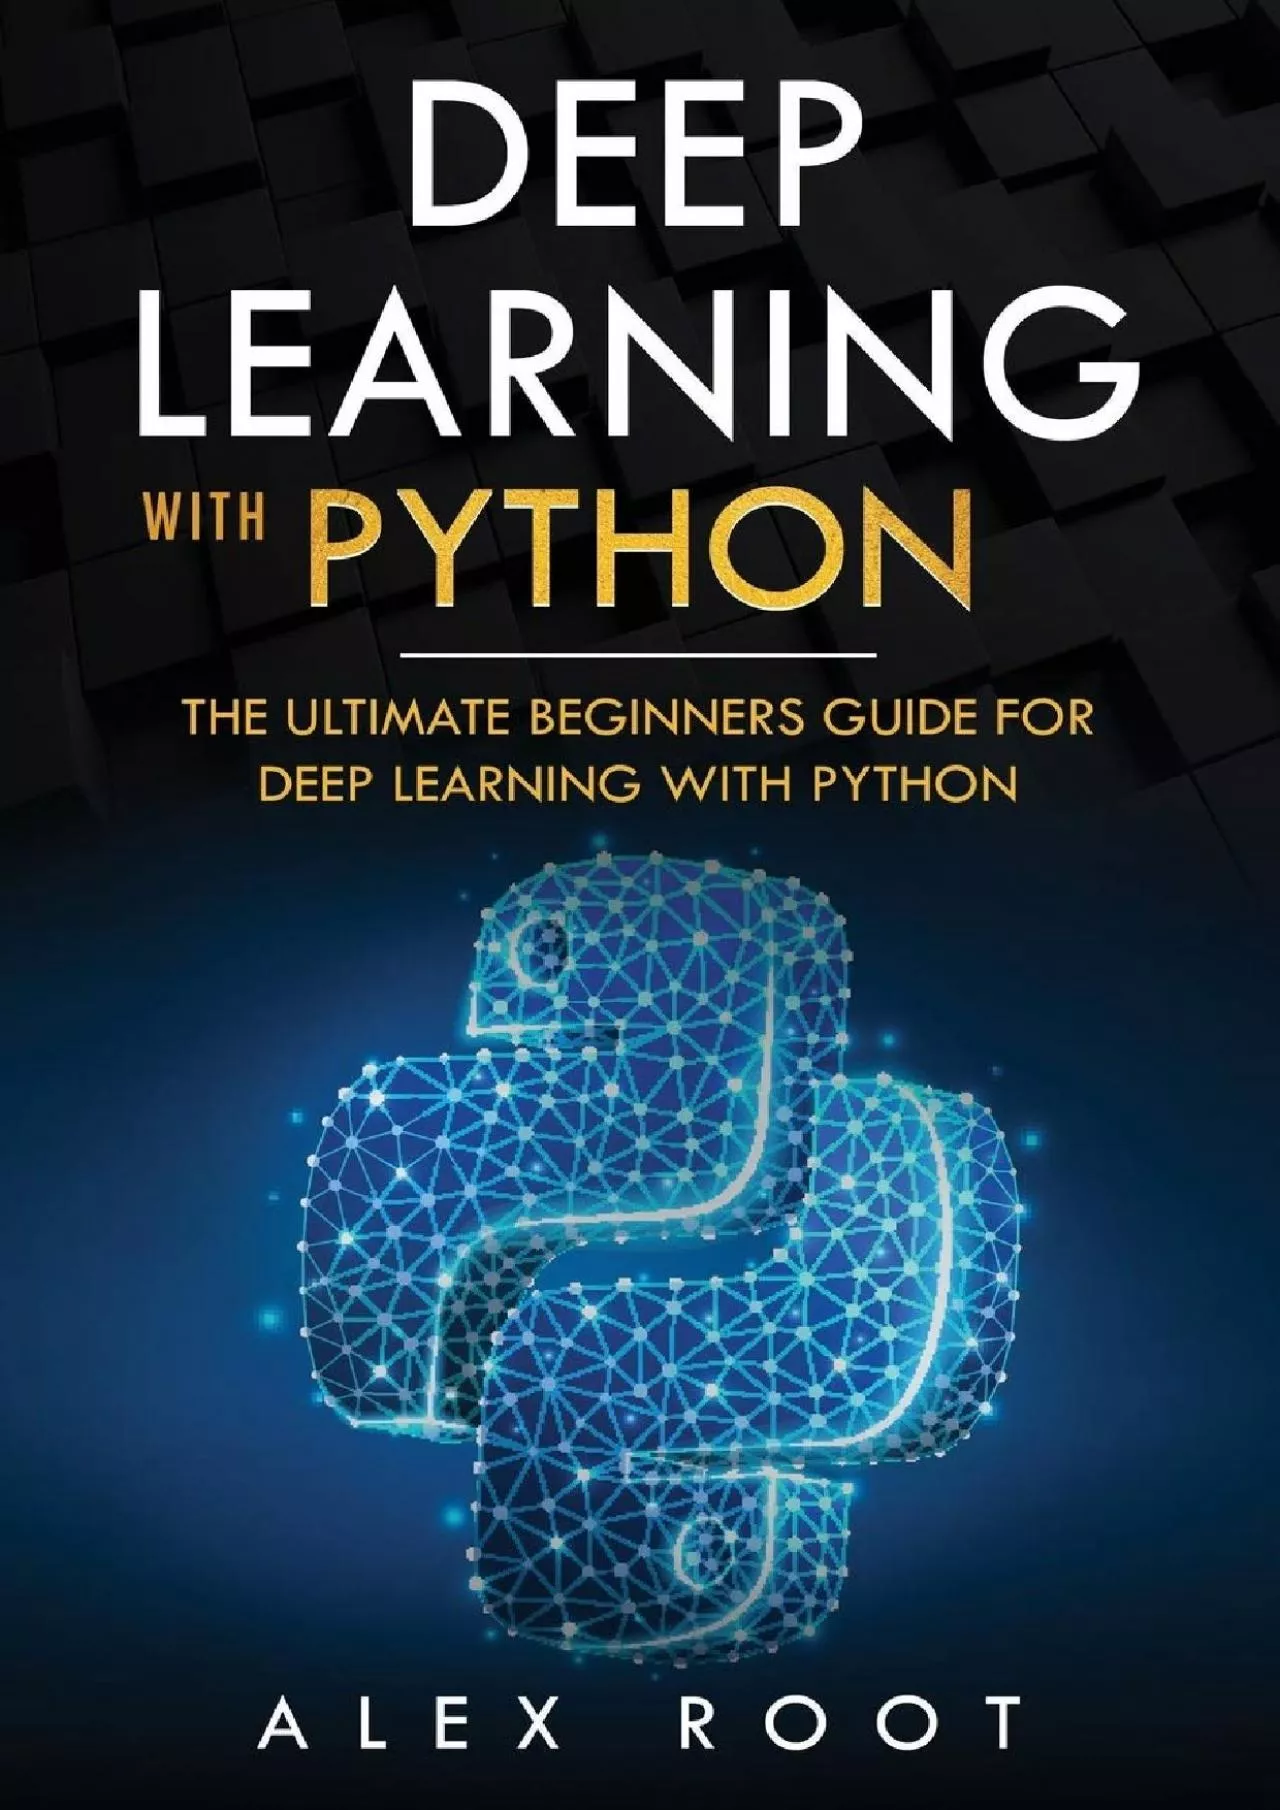 [READING BOOK]-Deep Learning with Python The Ultimate Beginners Guide for Deep Learning